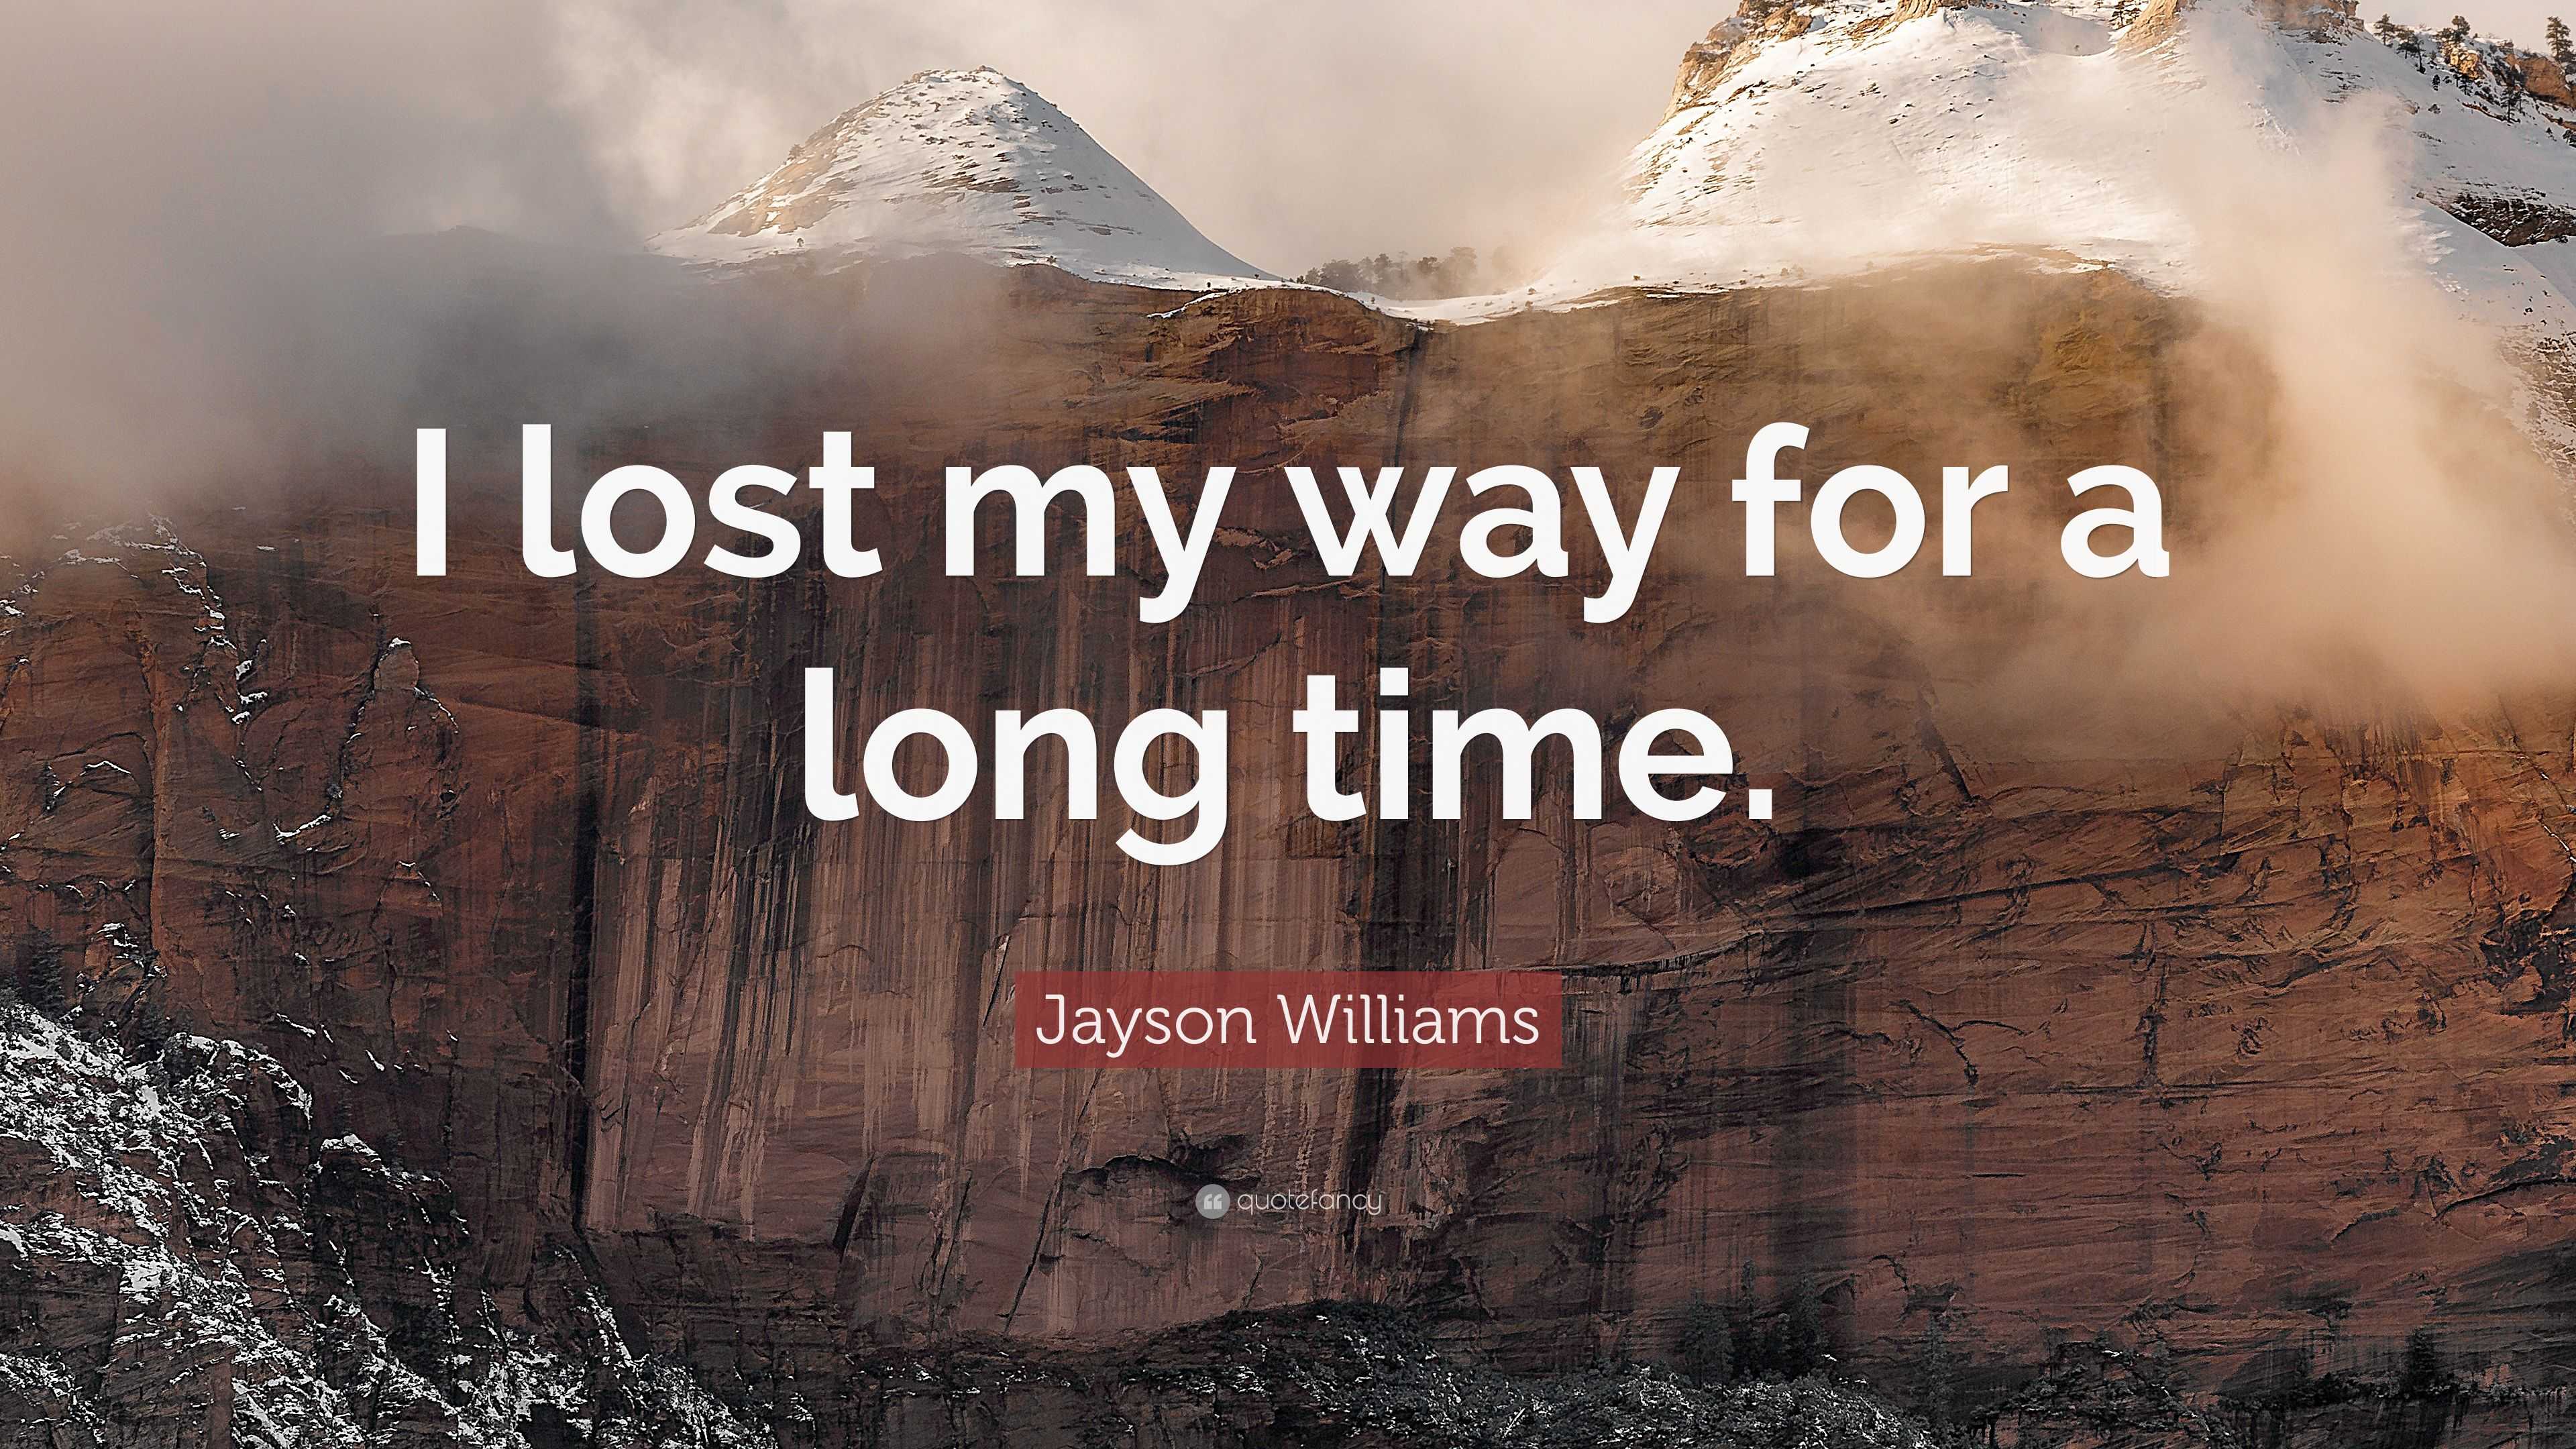 Jayson Williams Quote “I lost my way for a long time ”